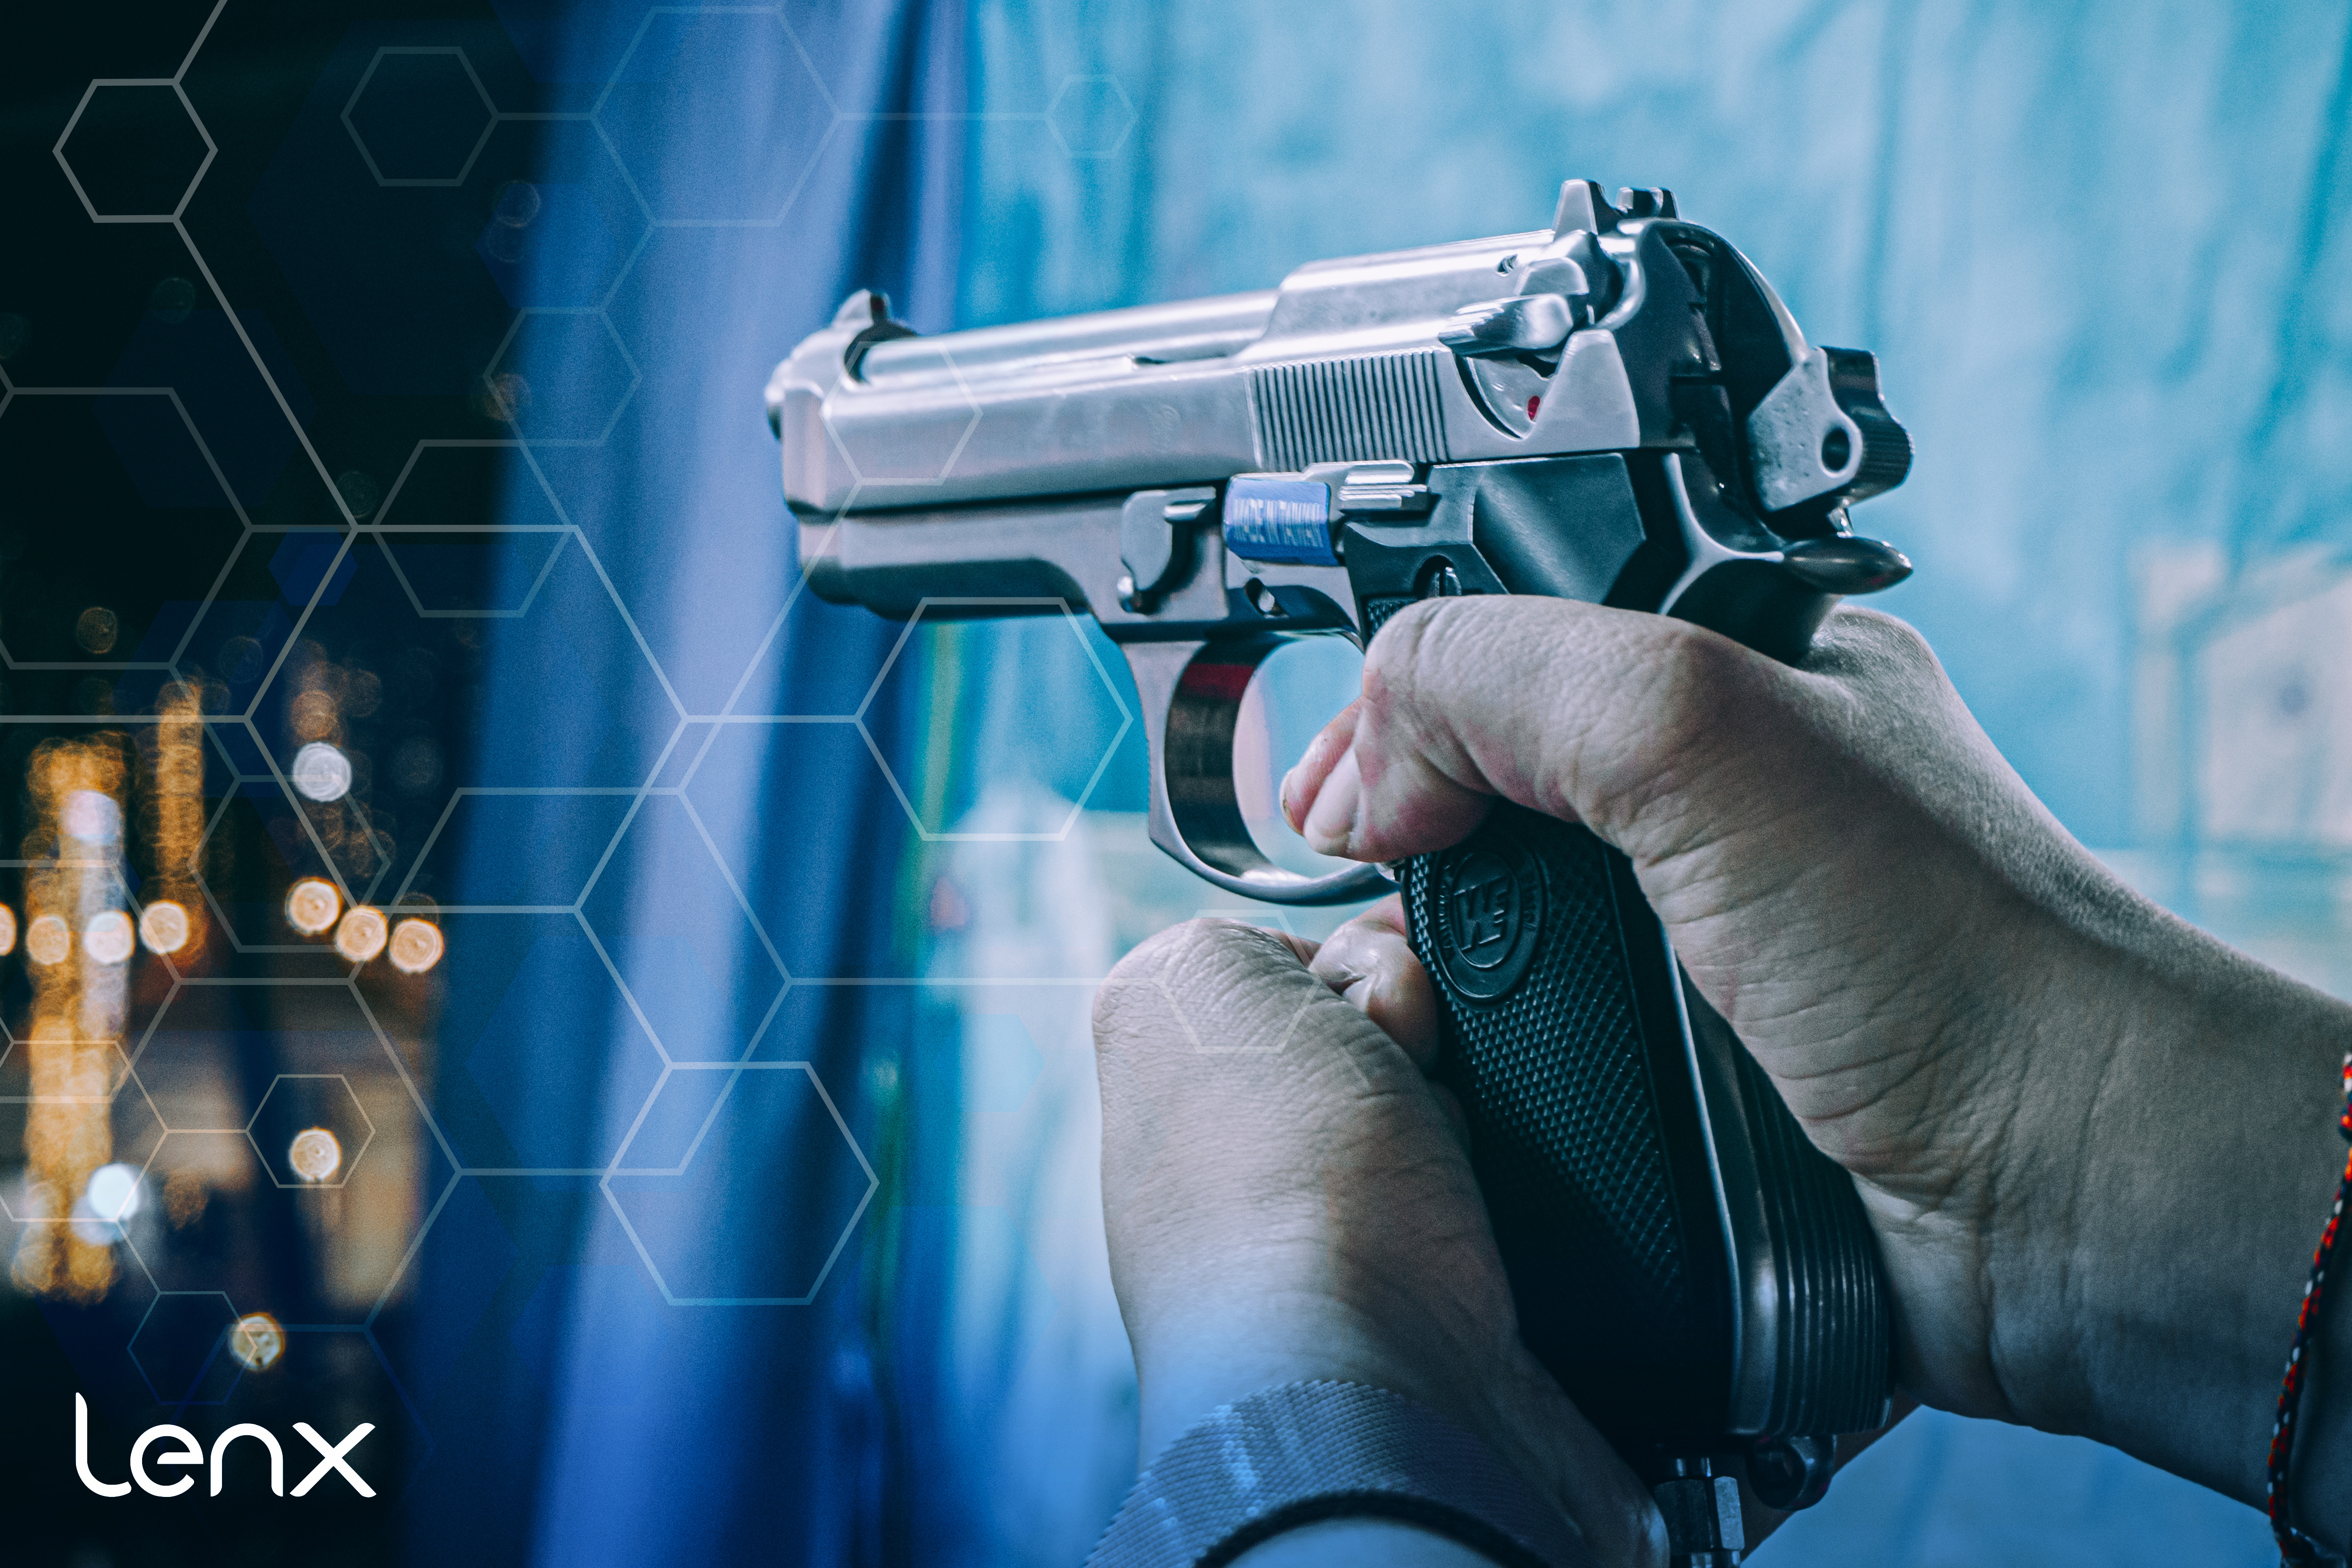 How AI Security and Active Shooter Detection Eases Concerns About Gun Violence